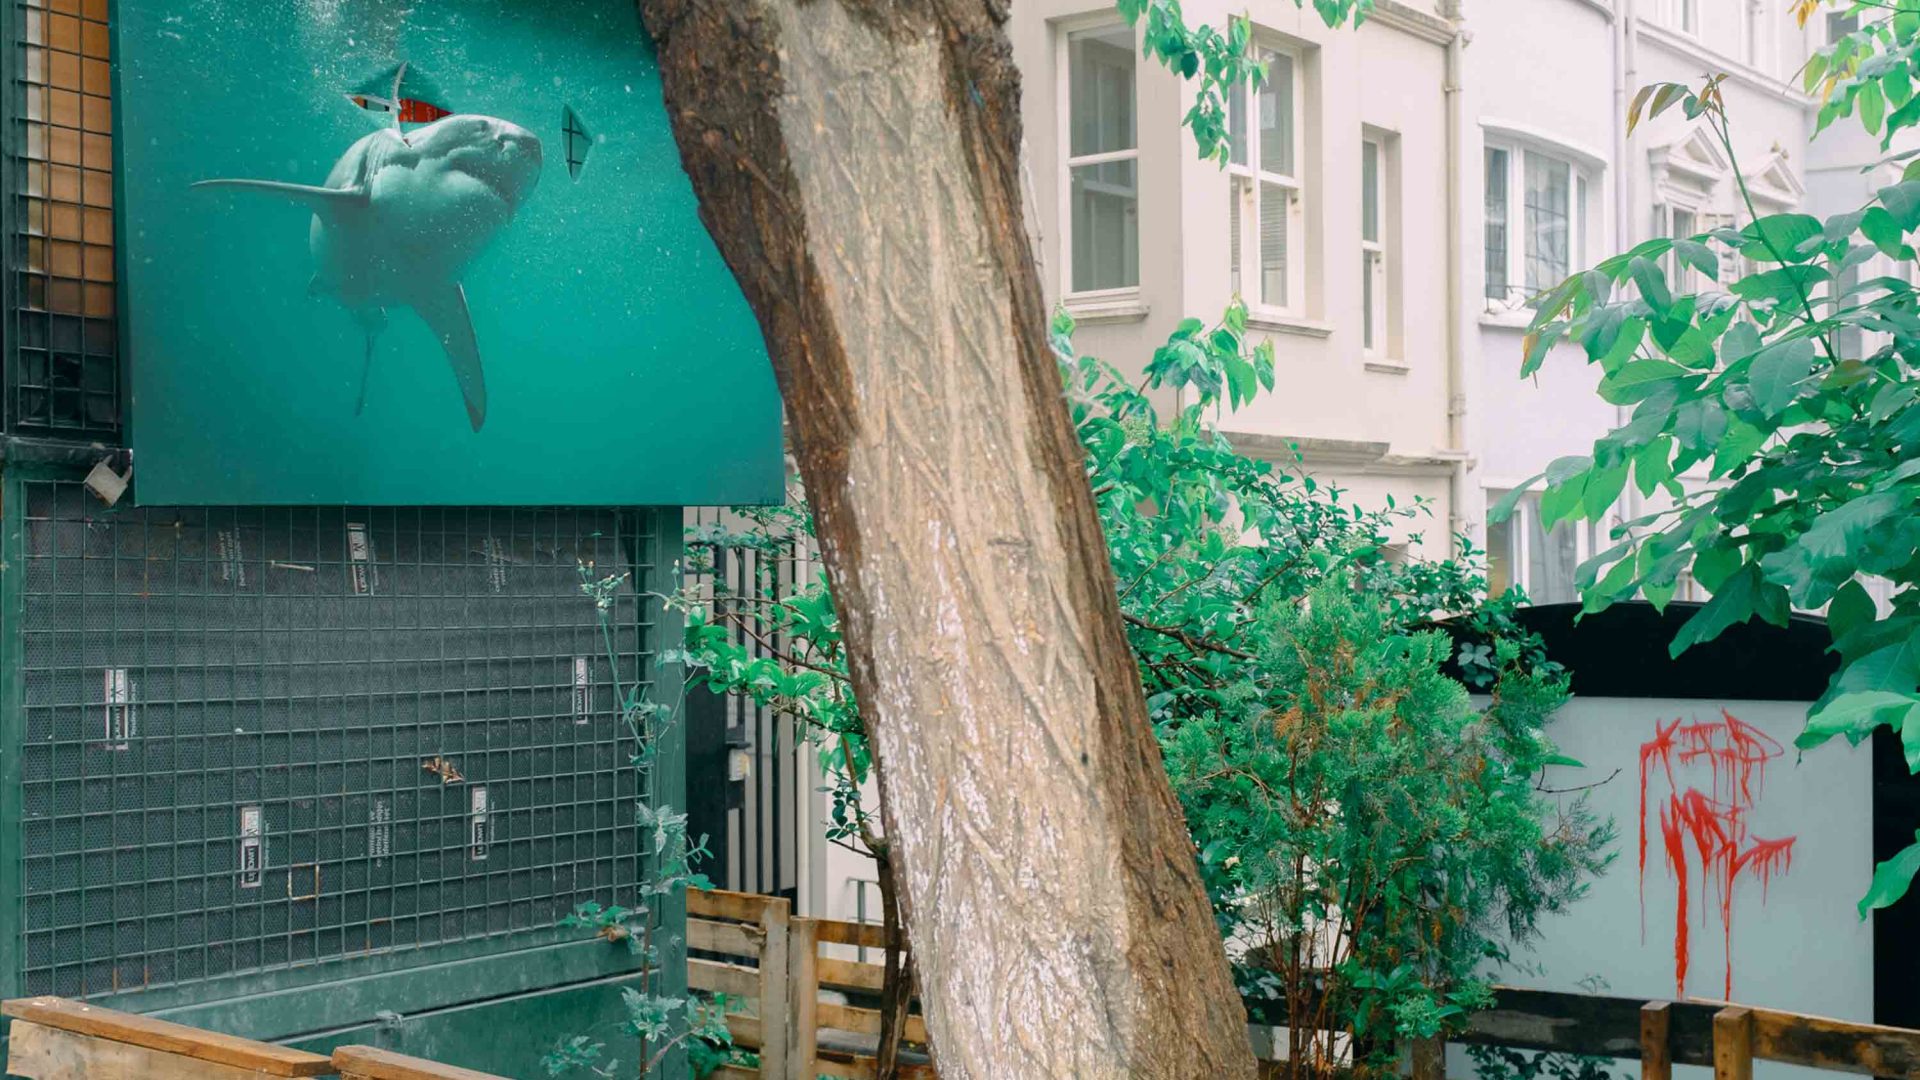 A tree in a courtyard which has a picture of a shark on the wall.